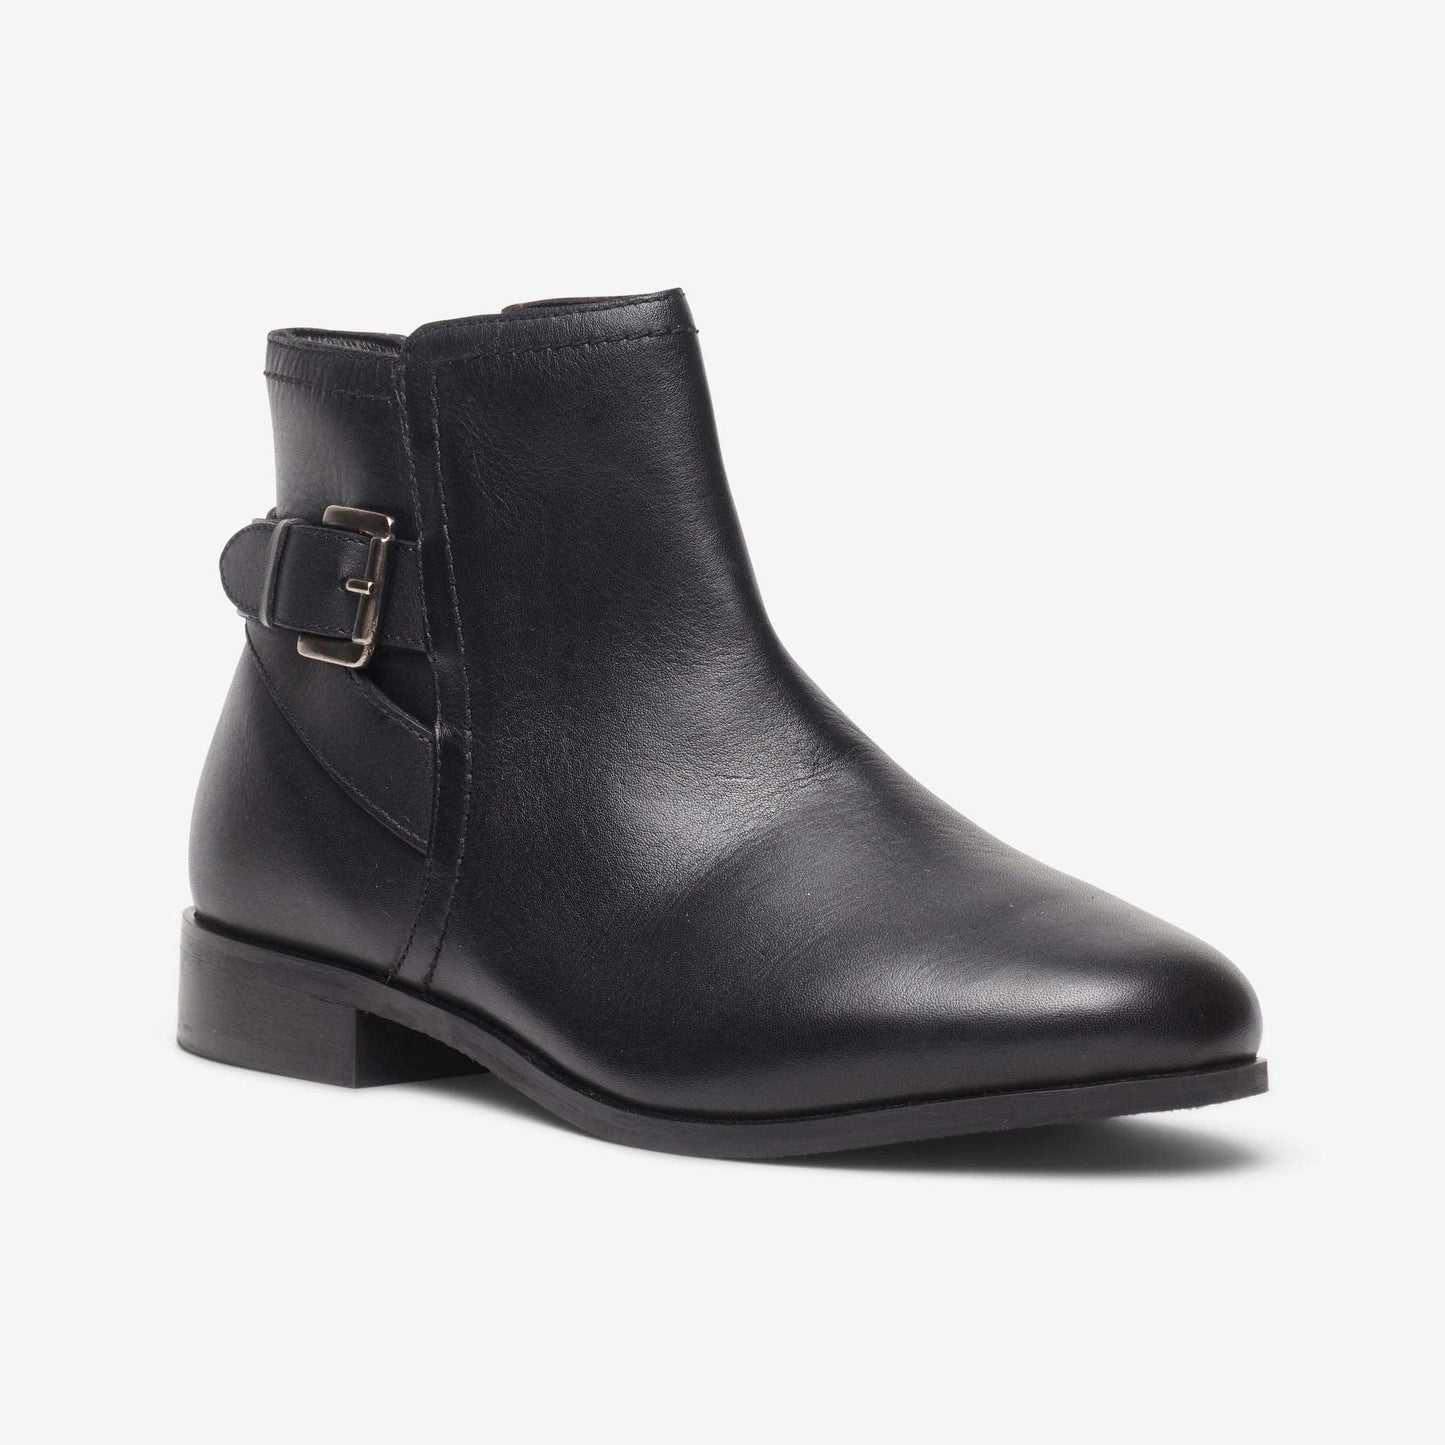 Side view of wide fit leather ankle boot with strap and buckle detail